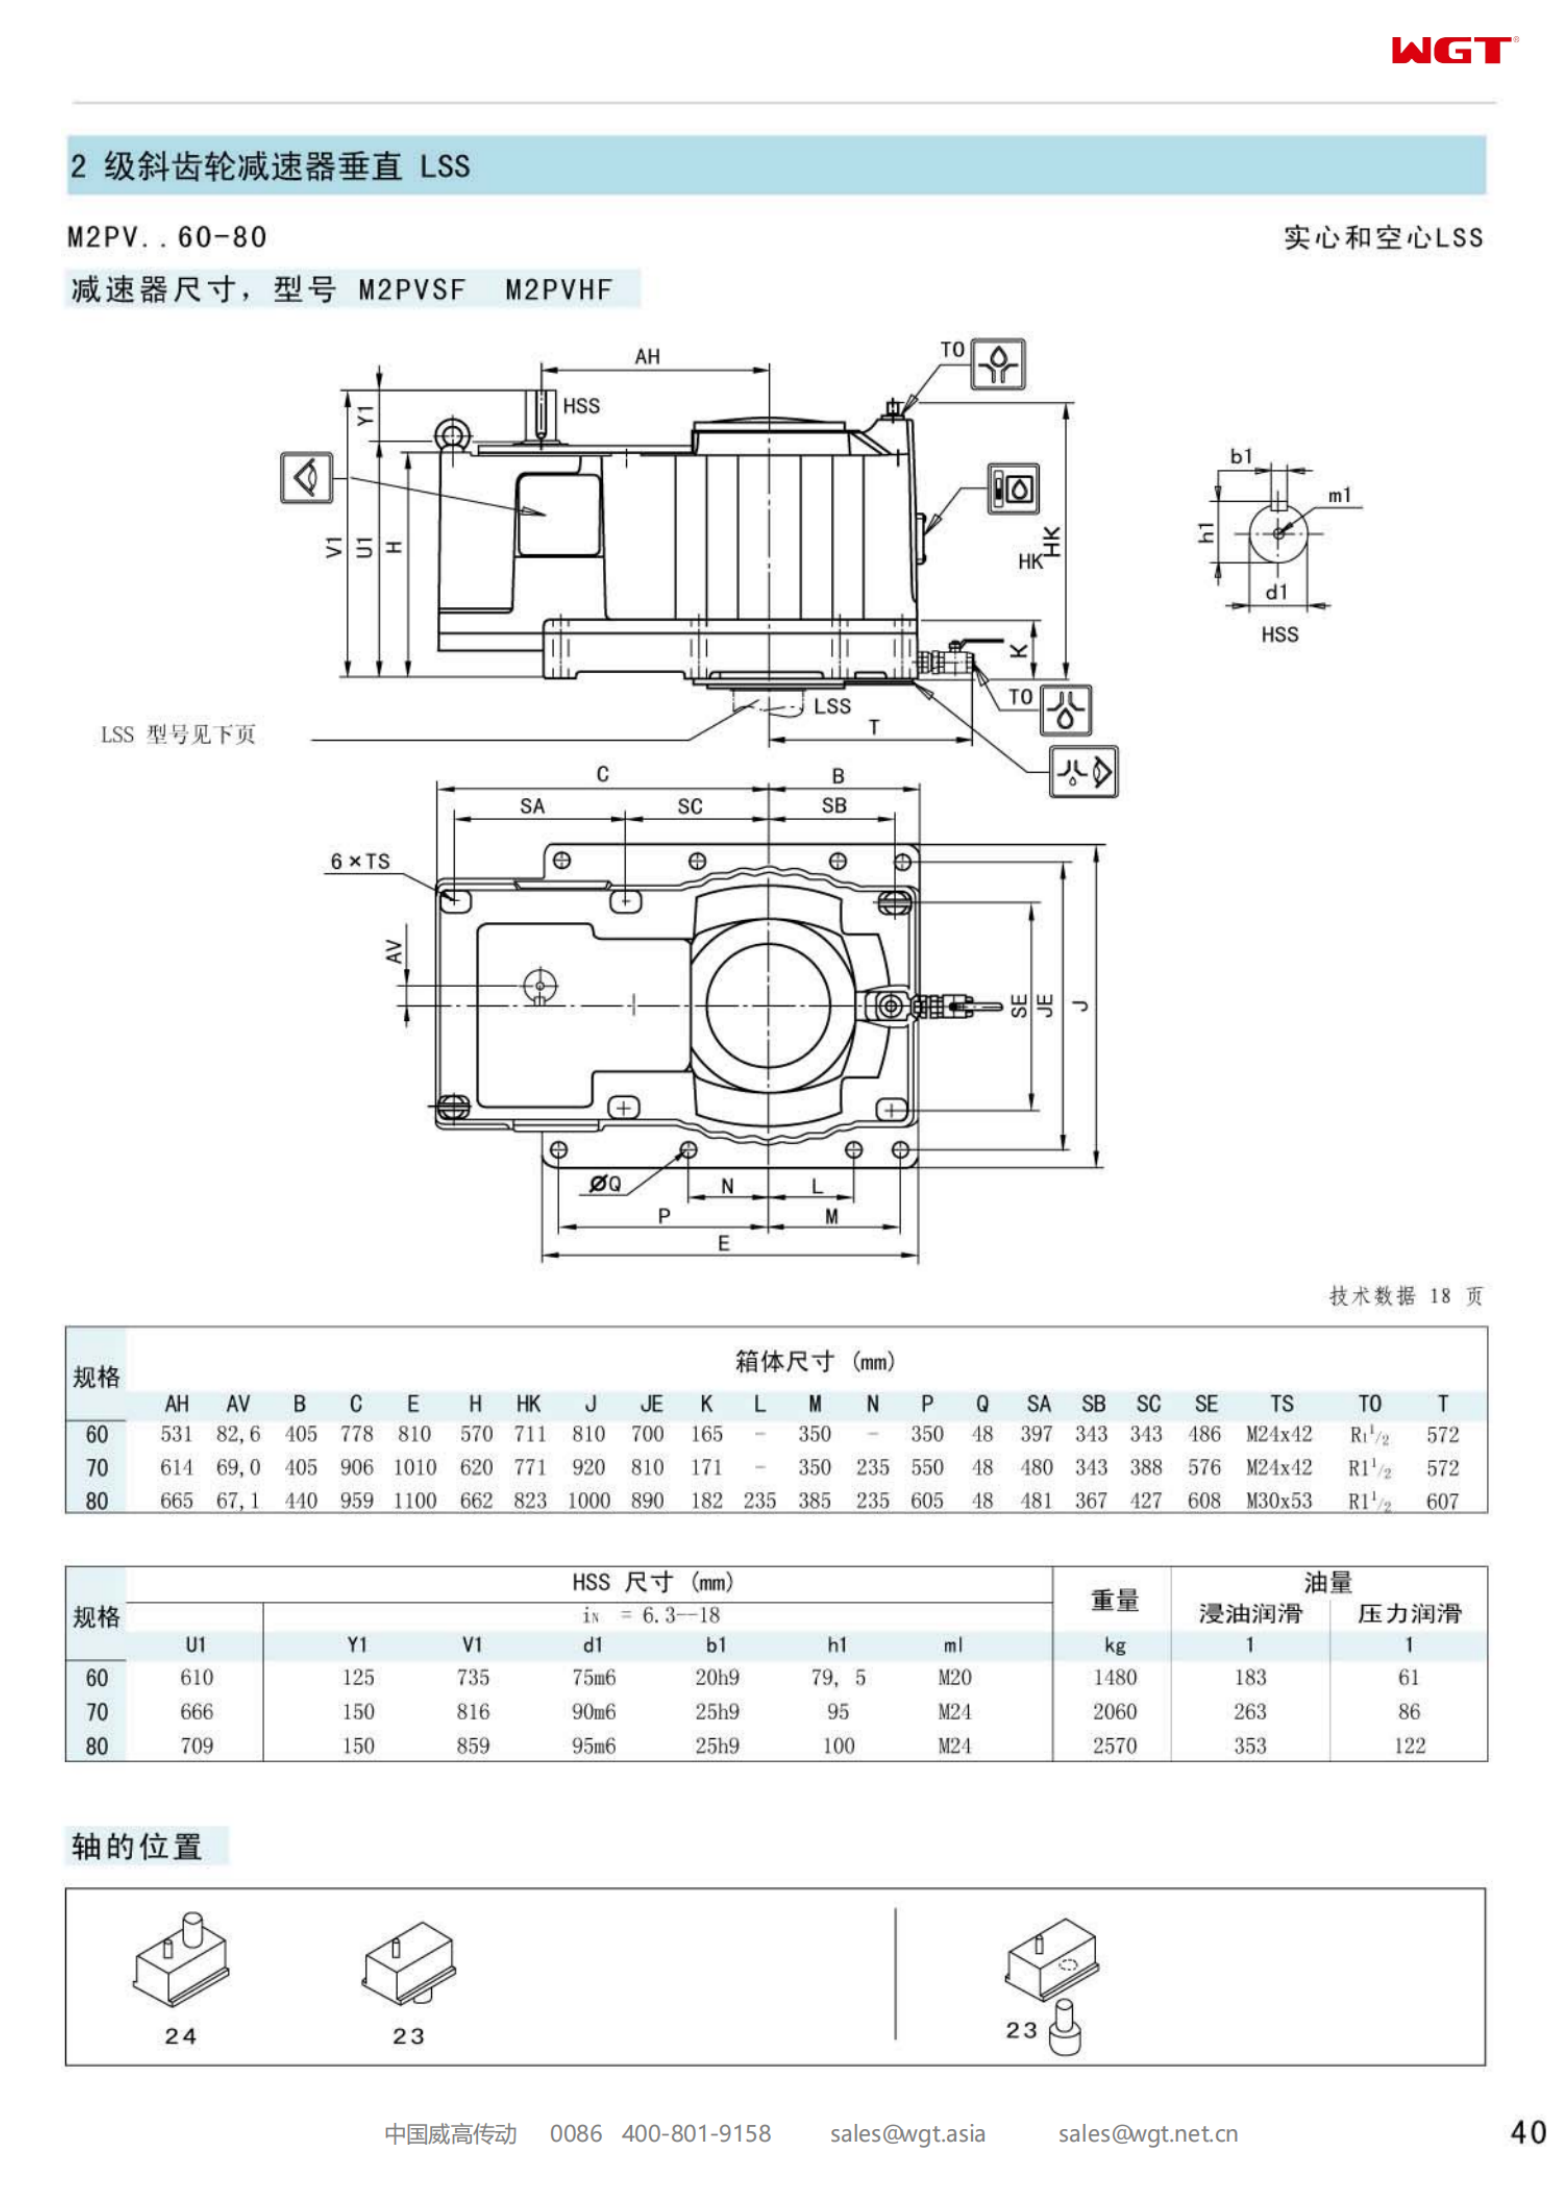 M2PVHF80 Replace_SEW_M_Series Gearbox